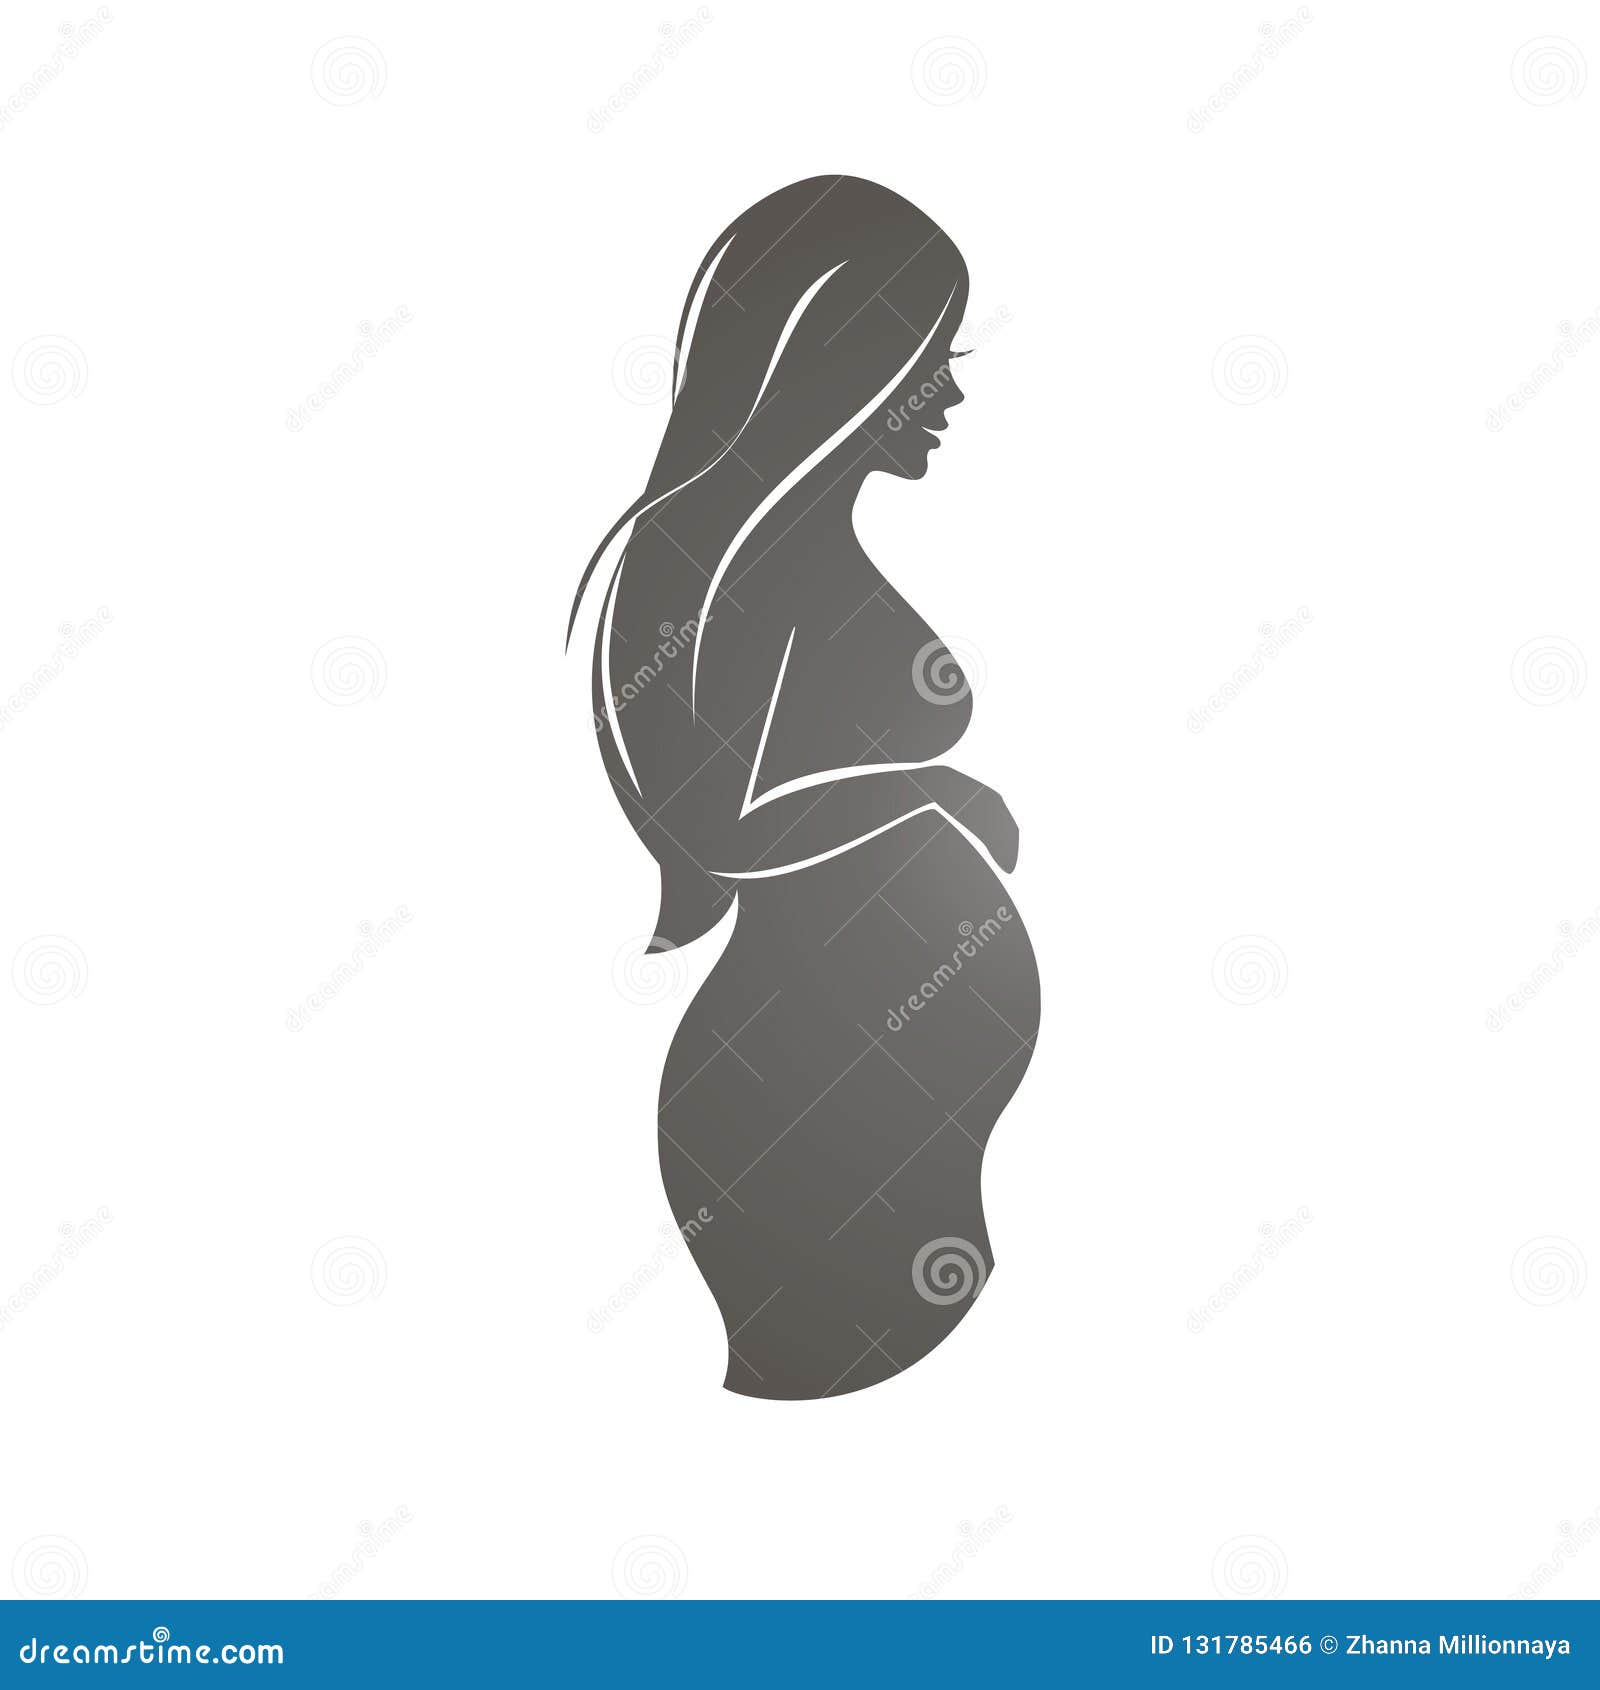 Pregnant woman symbol stock vector. Illustration of baby - 131785466